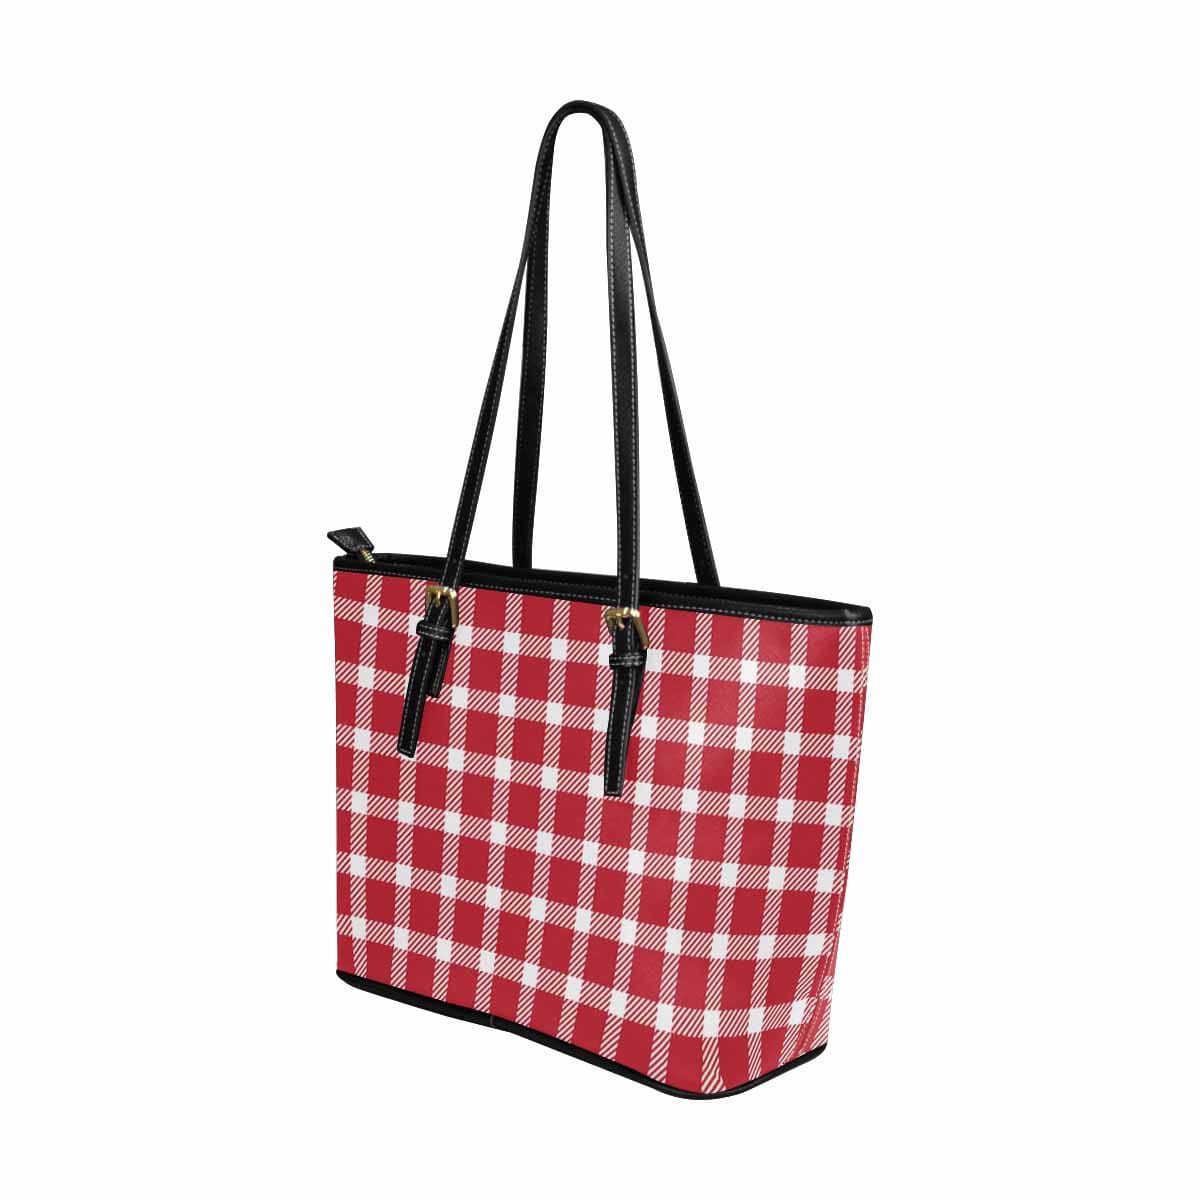 Large Leather Tote Shoulder Bag - Buffalo Plaid Red And White - Bags | Leather